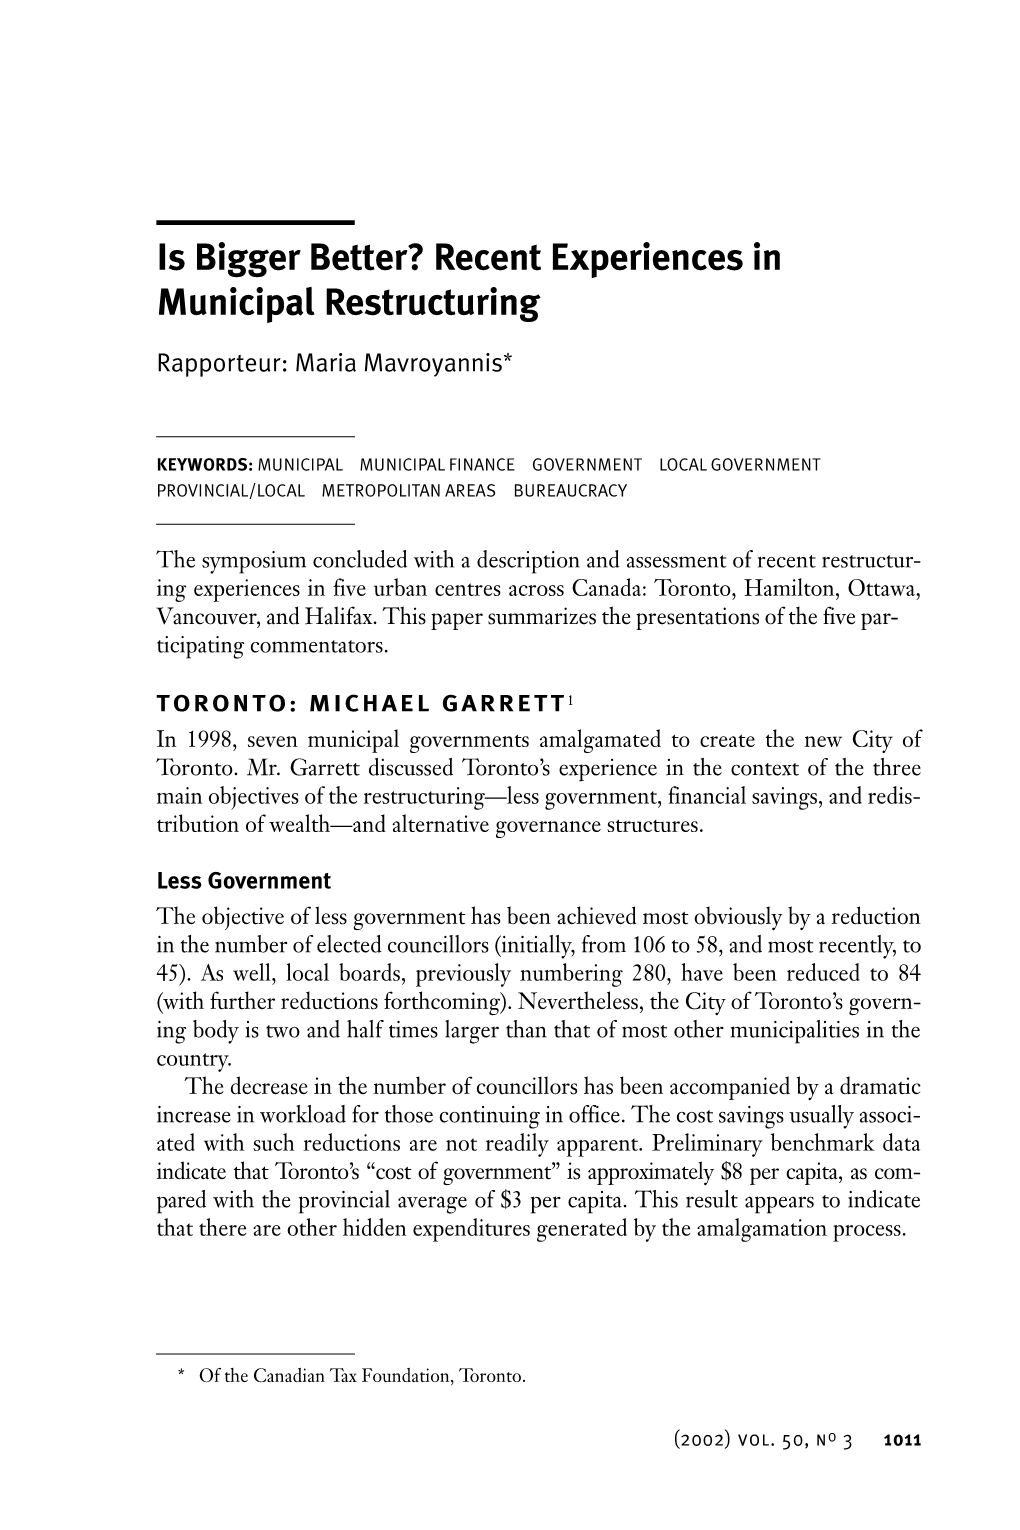 Is Bigger Better? Recent Experiences in Municipal Restructuring